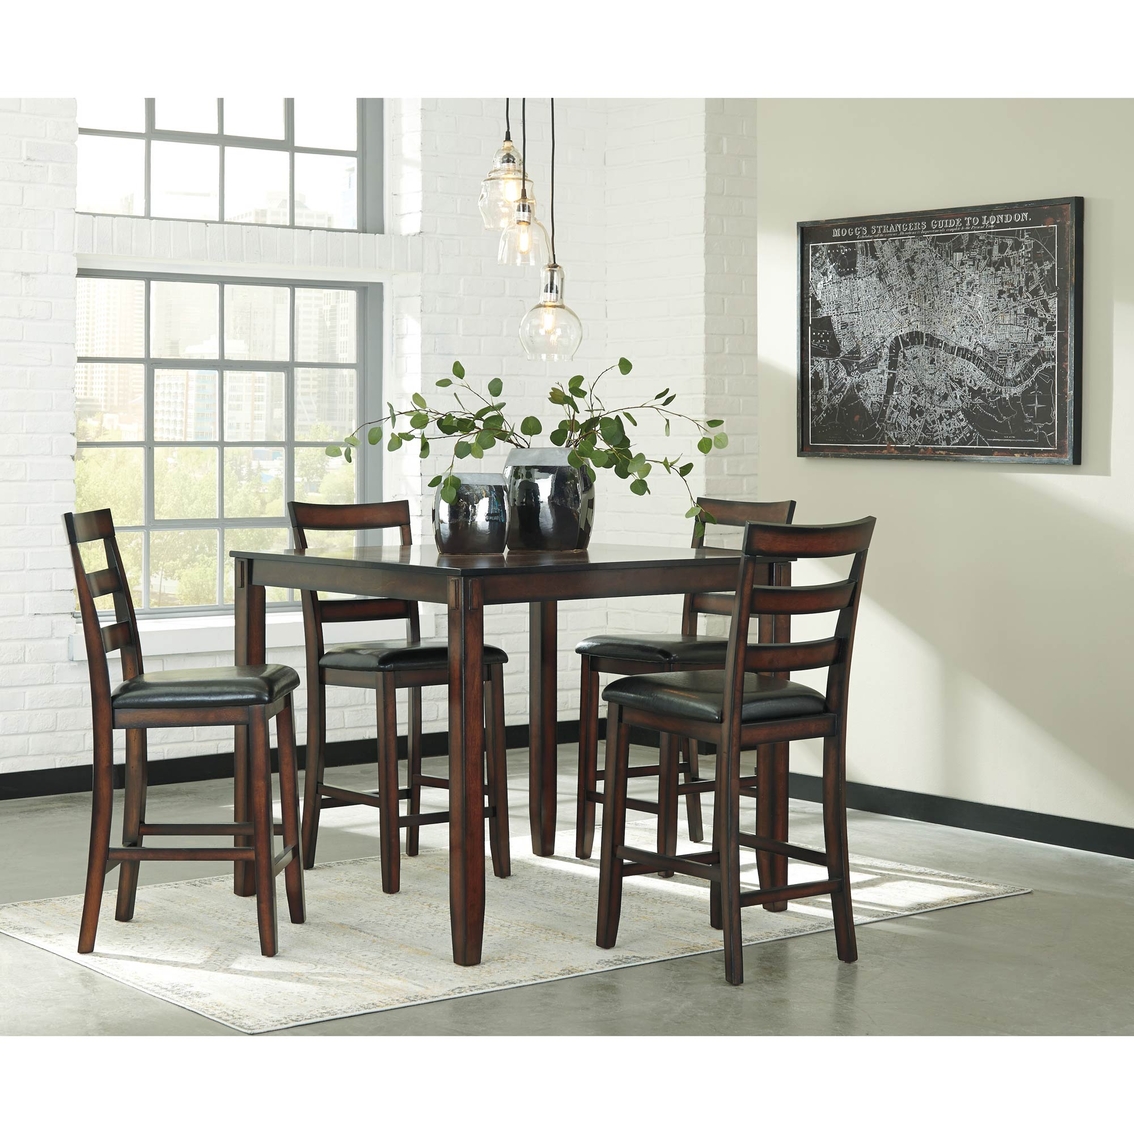 Signature Design by Ashley Covair 5 Pc. Square Counter Height Dining Set - Image 2 of 2